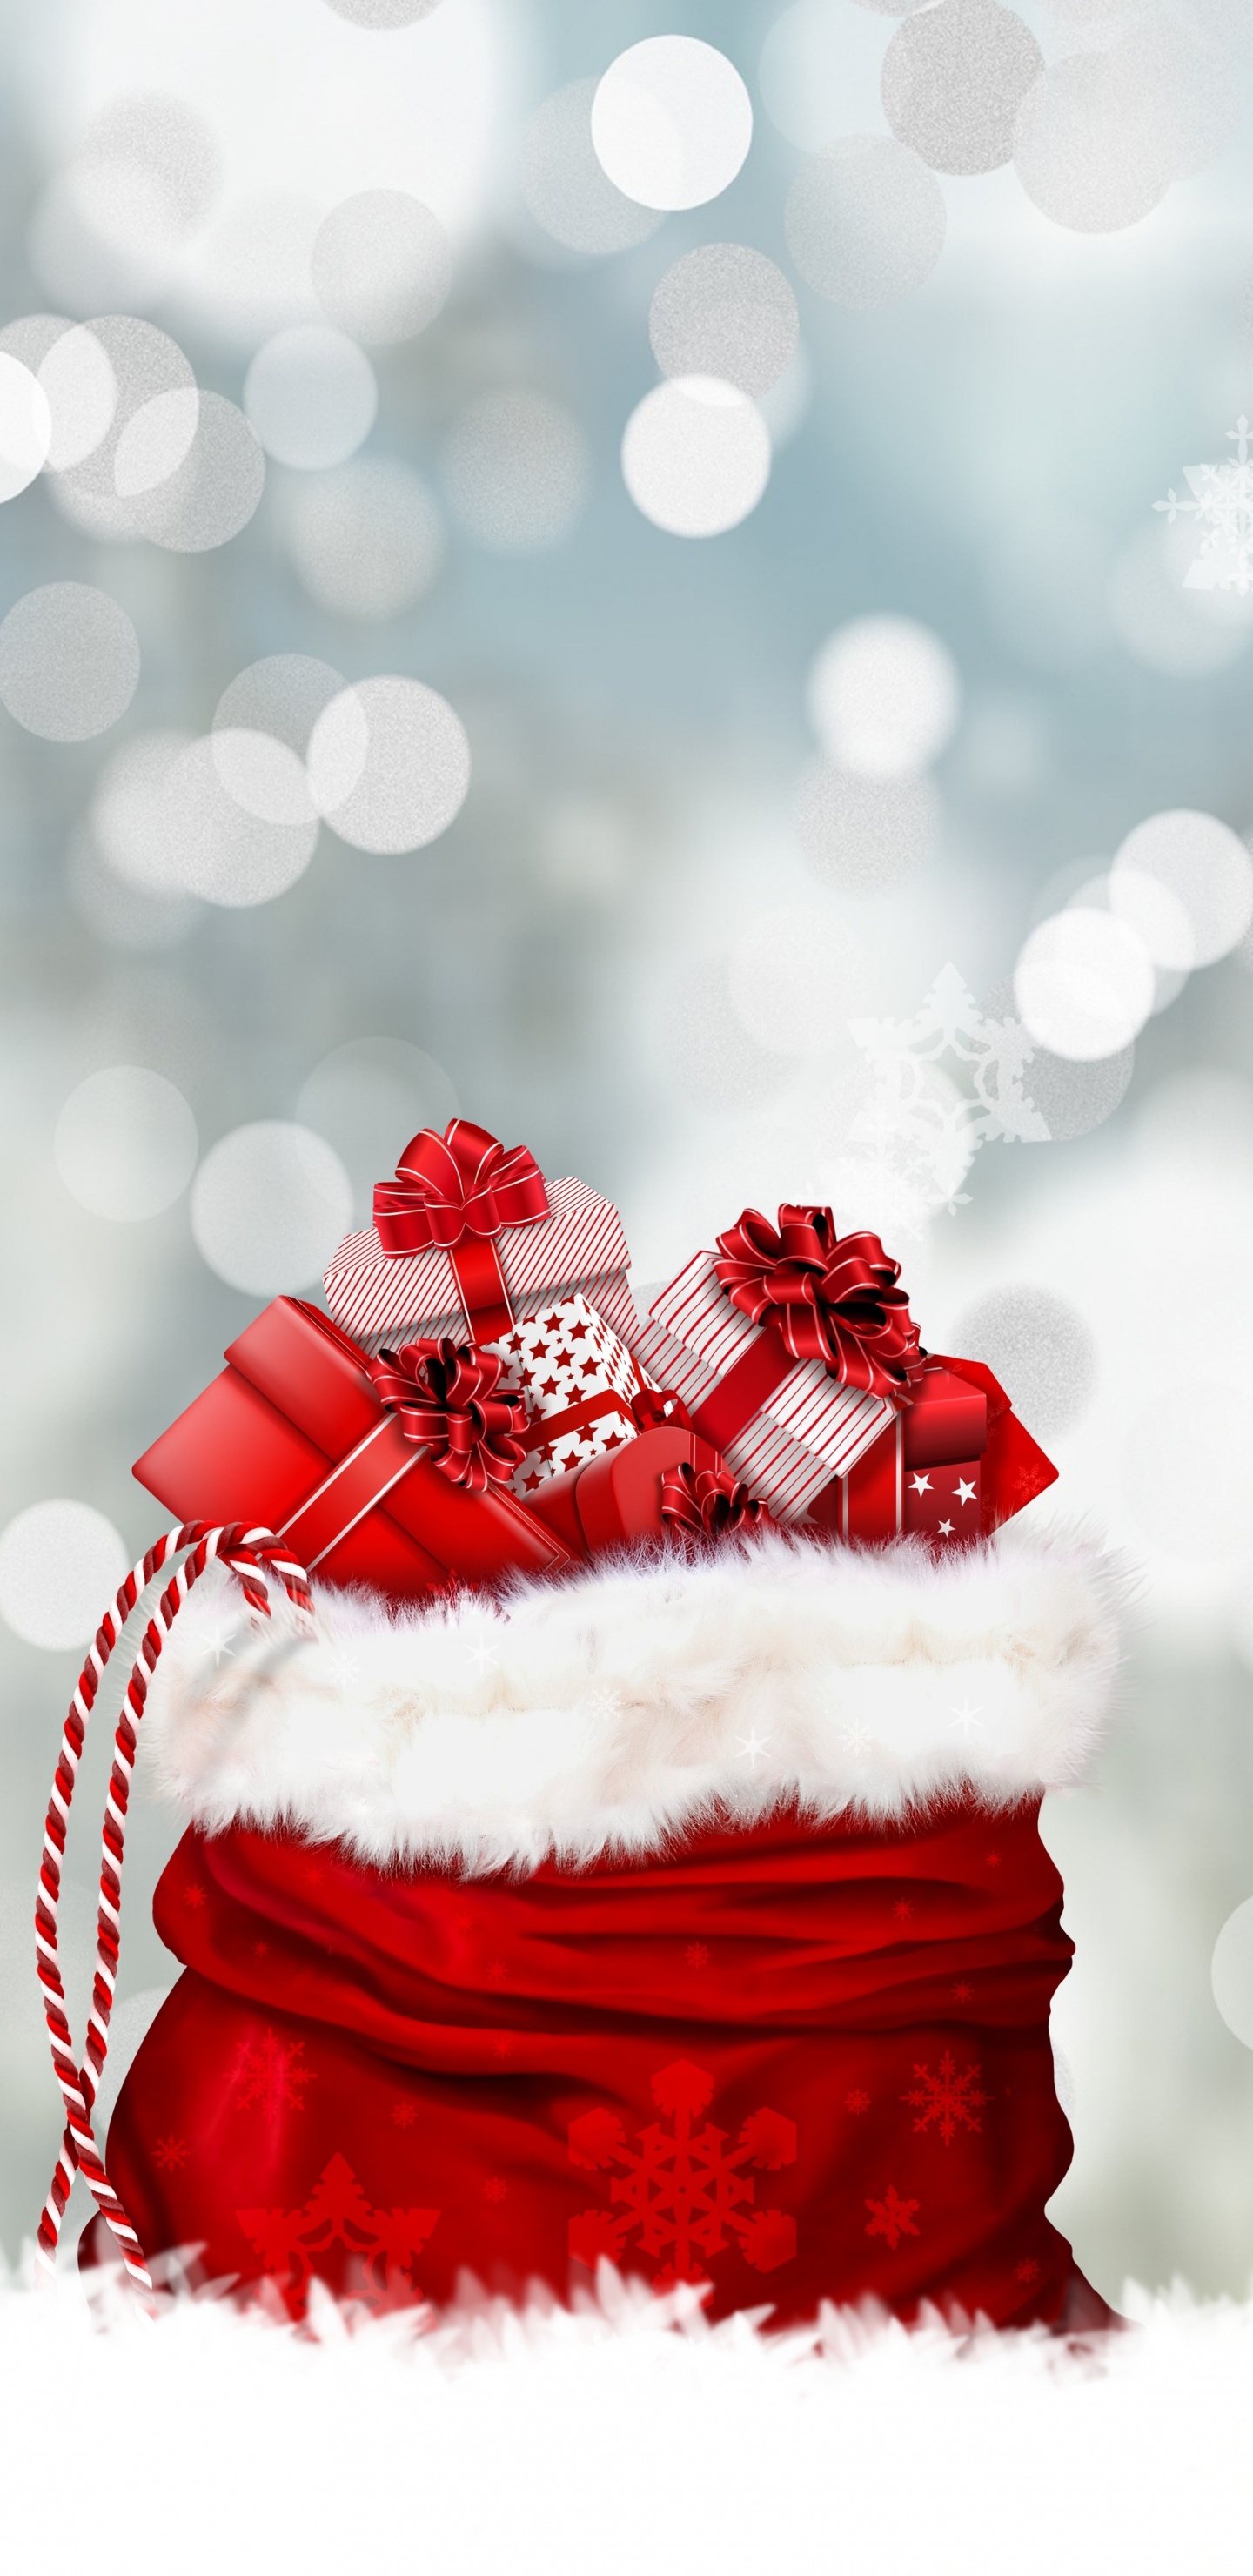 Christmas Day, Santa Claus, Christmas Gift, Red, Winter. Wallpaper in 1440x2960 Resolution